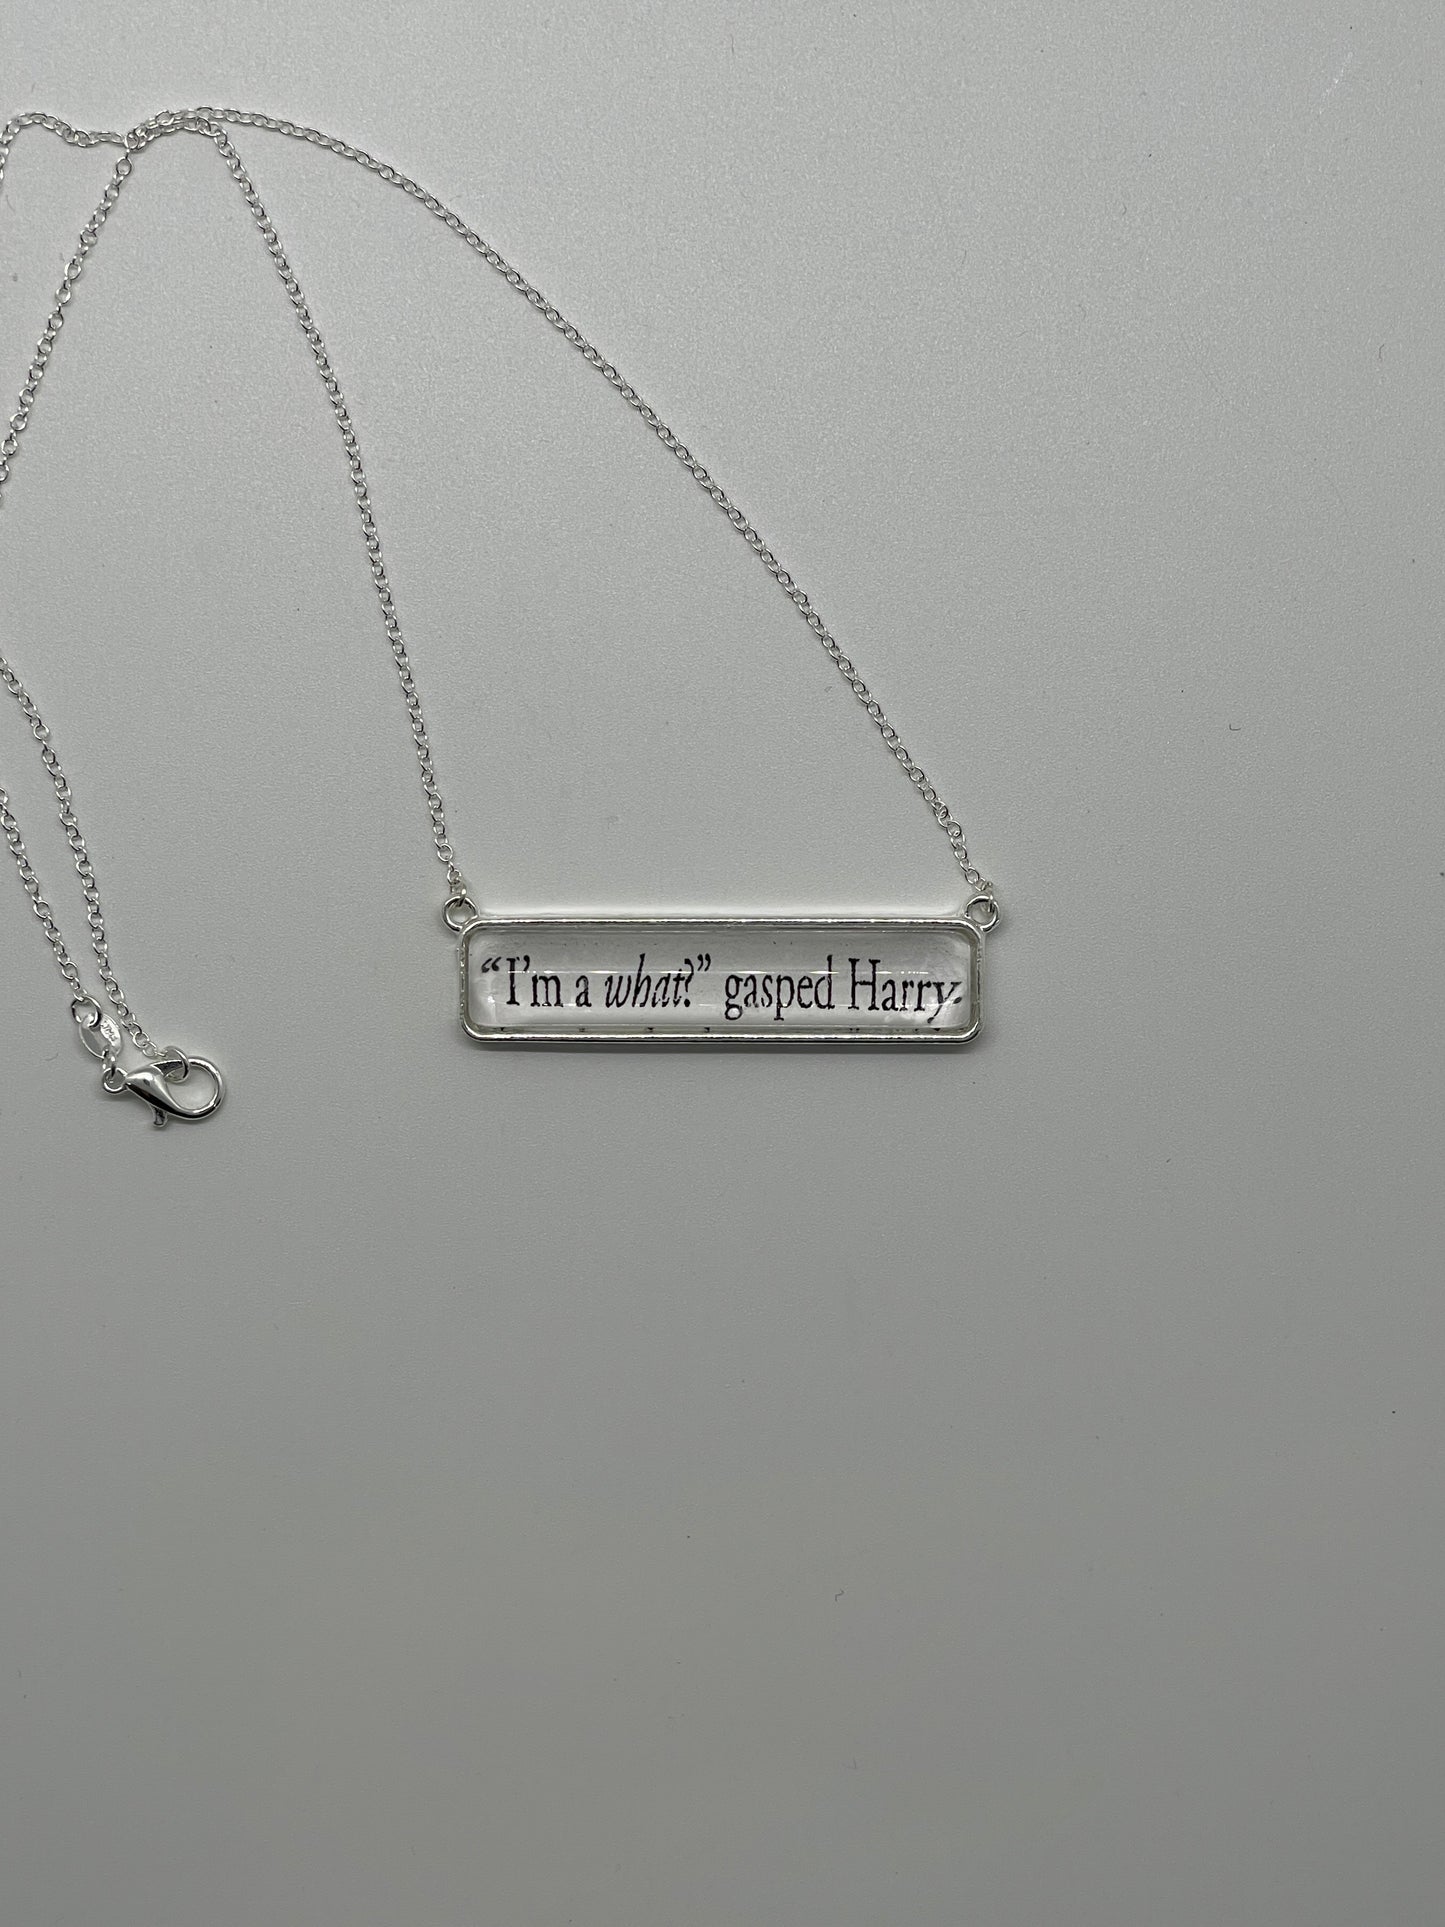 Literary Necklace: “I’m a what?”